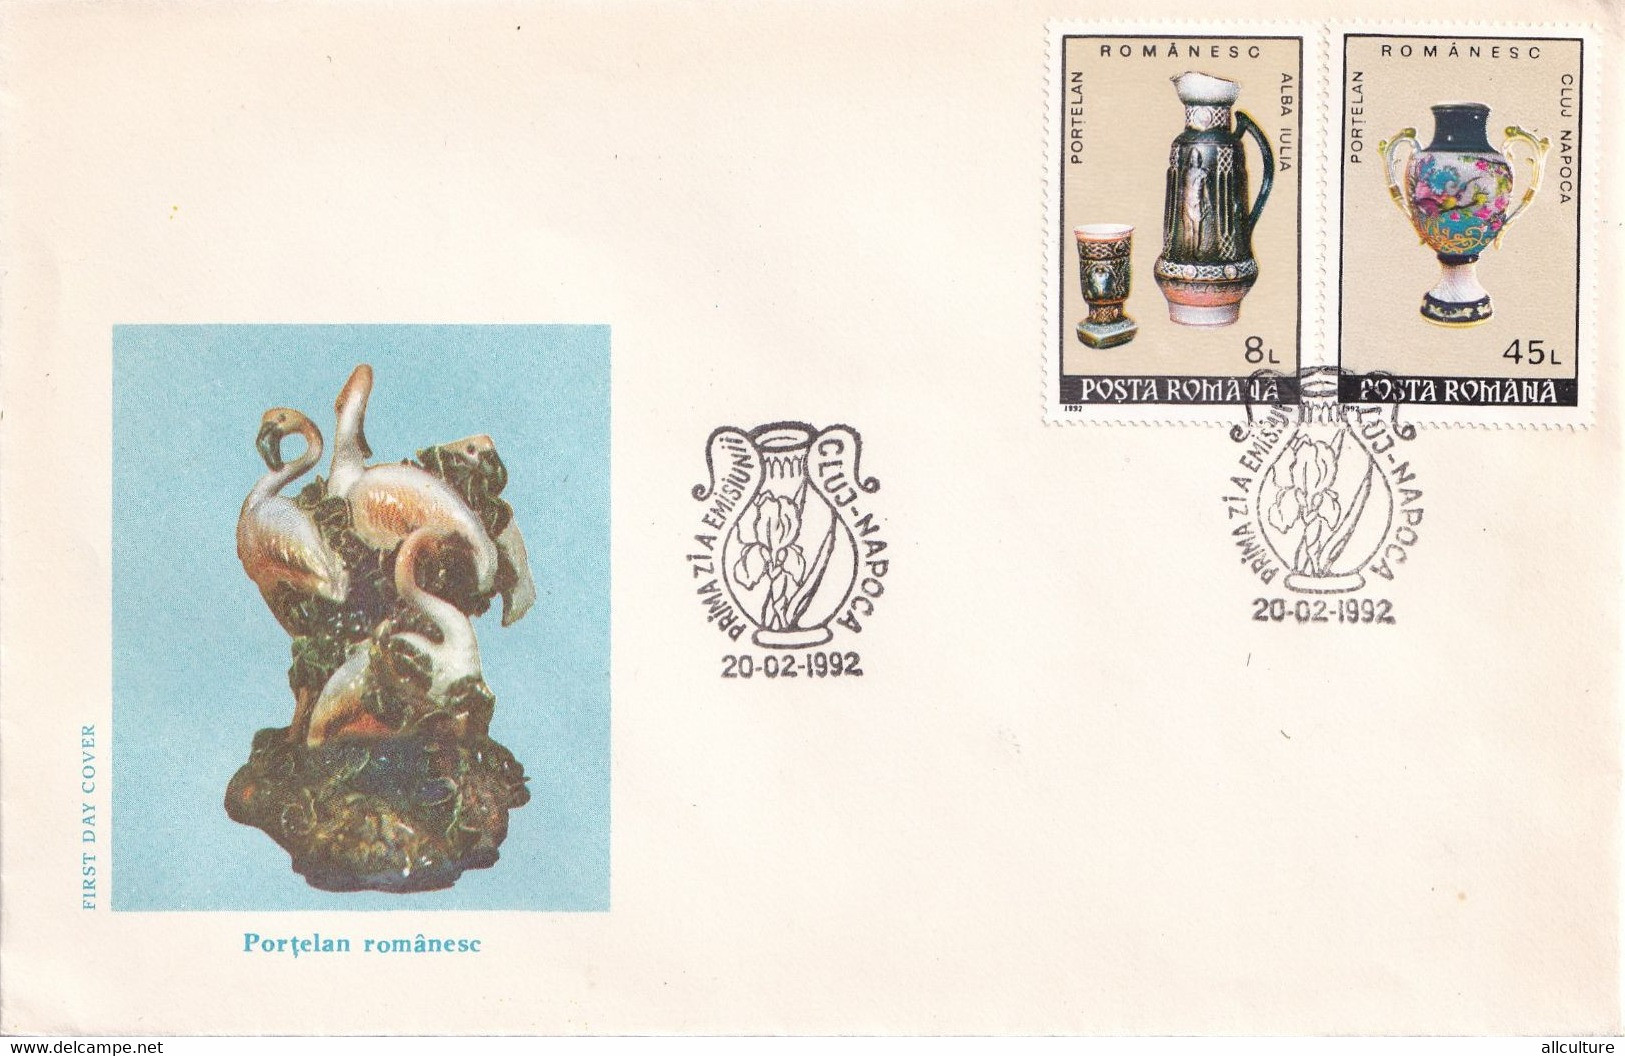 A2852 - Romanian Porcelain, Romania, Cluj Napoca 1992 2 Covers First Day Cover - Porcelaine